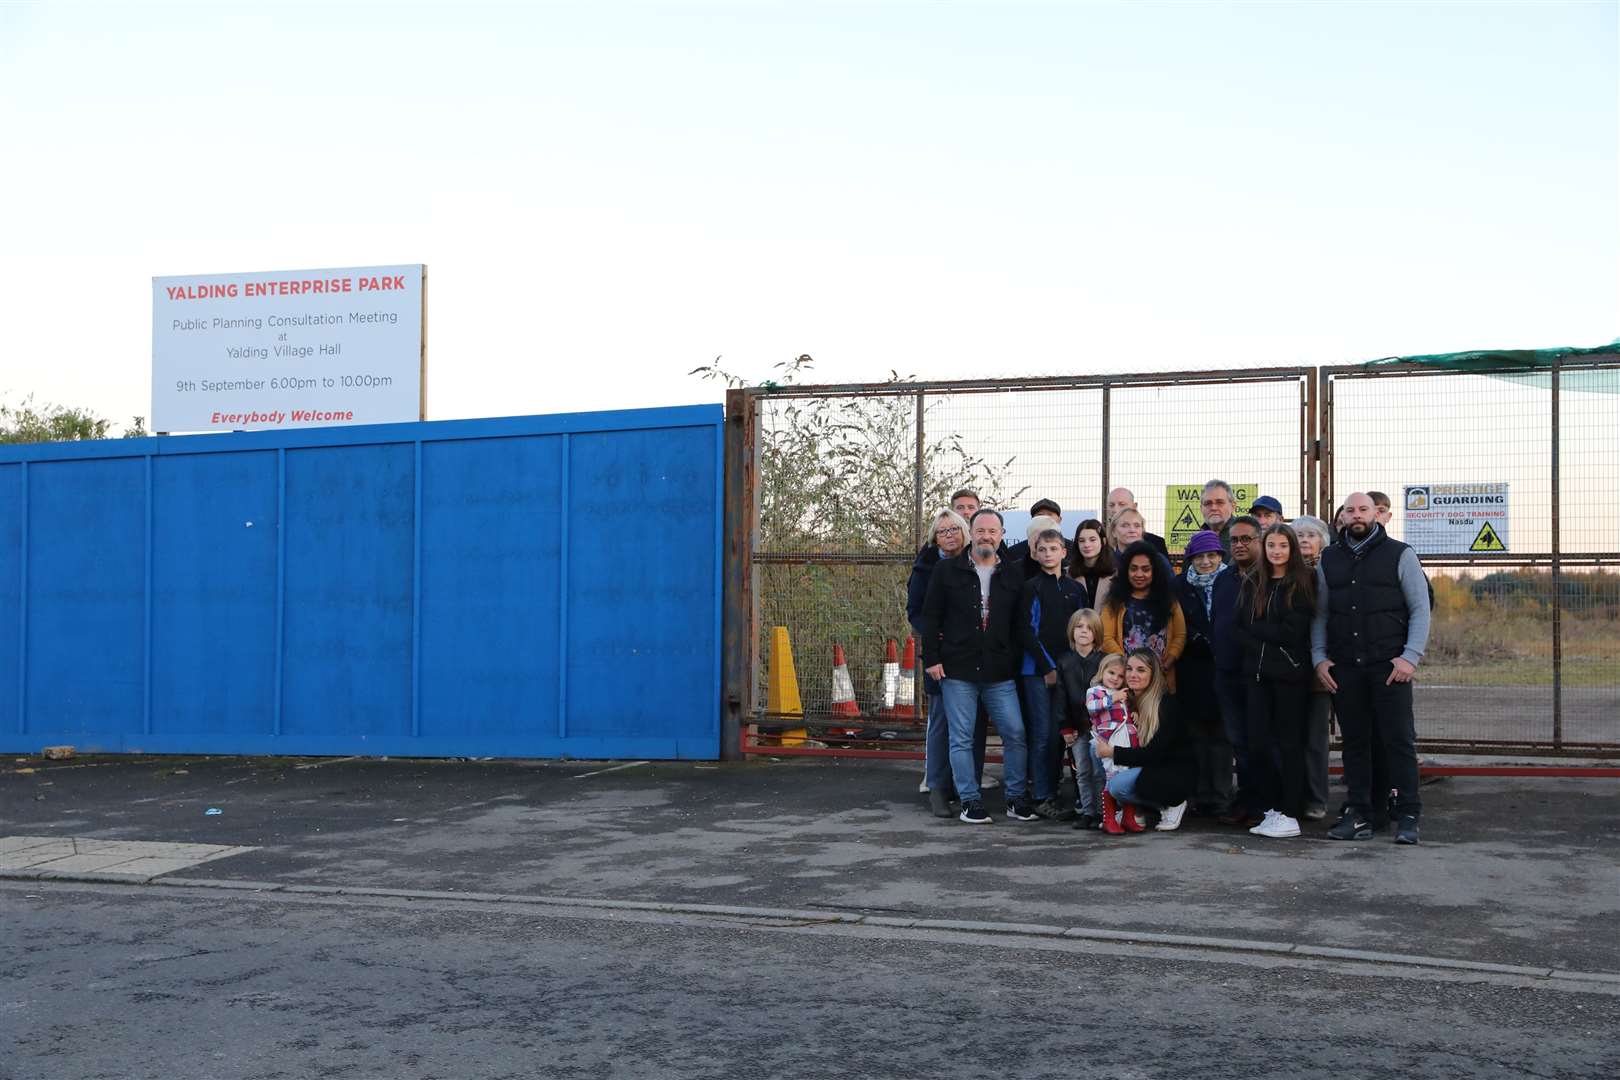 An earlier protest by Yalding residents opposed to the plans, pictured outside the site's entrance.